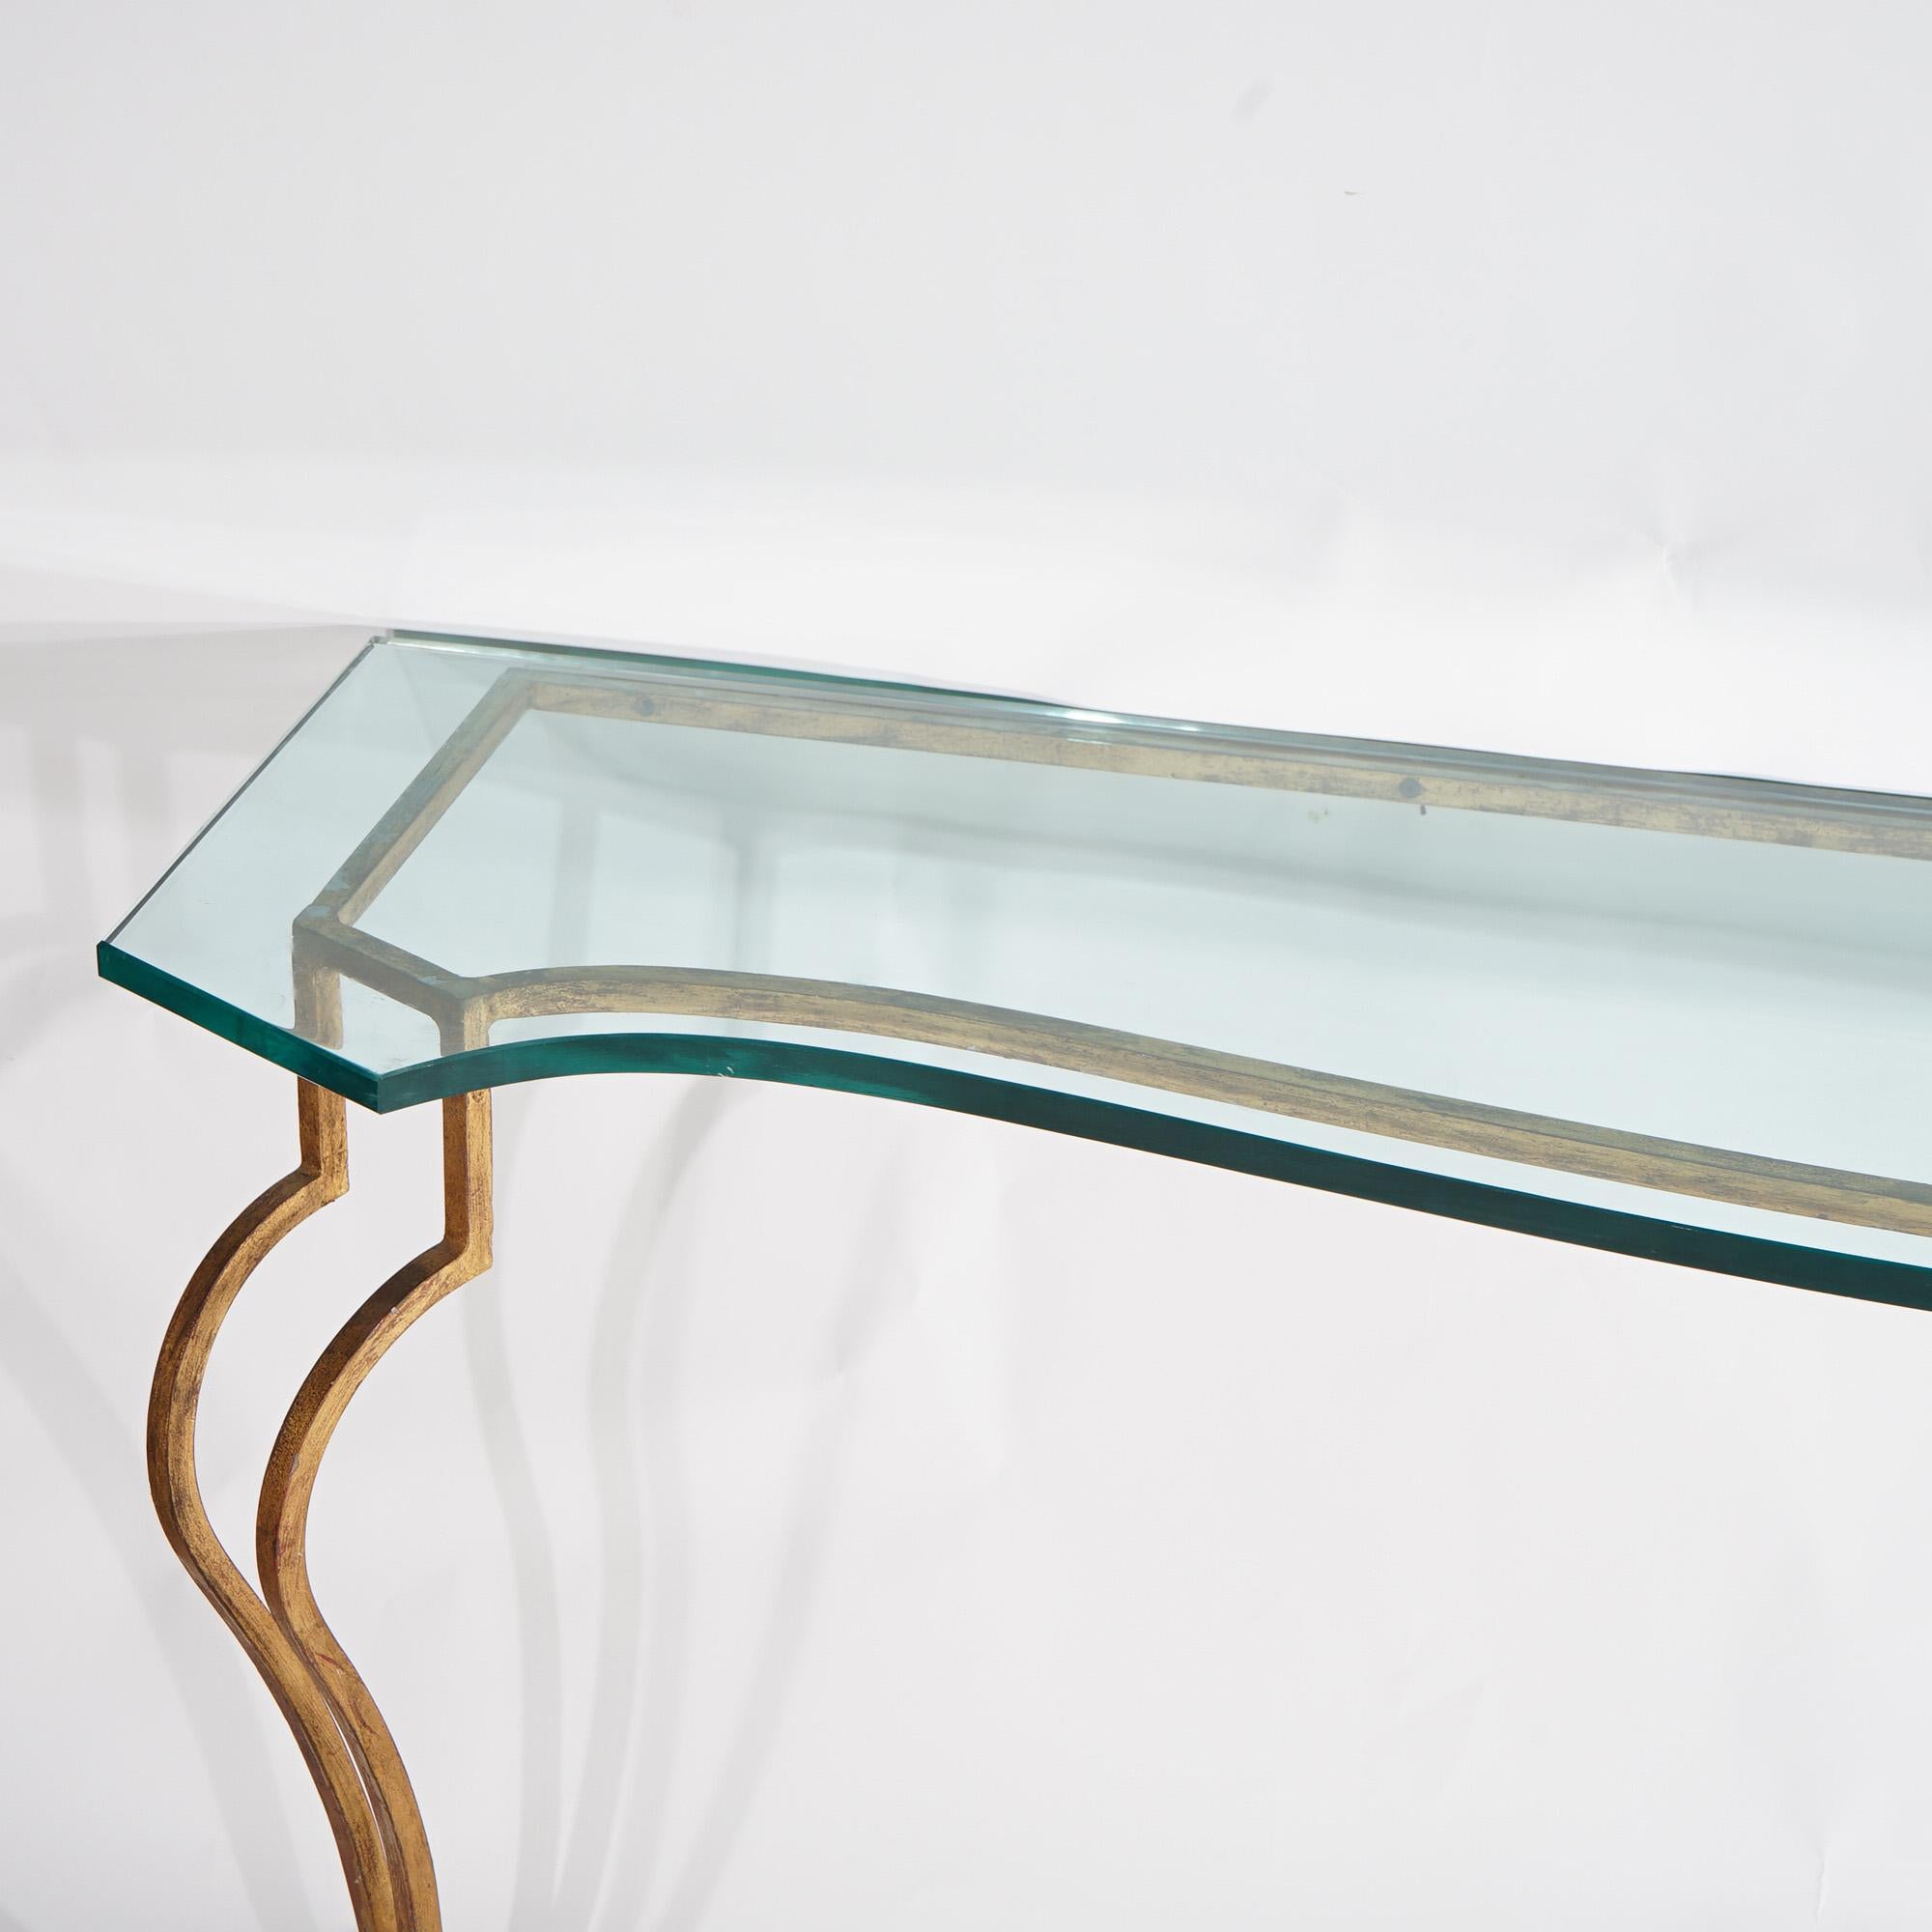 Italian Gold Gilt Wrought Iron Console Table with Glass Top 20th C For Sale 5